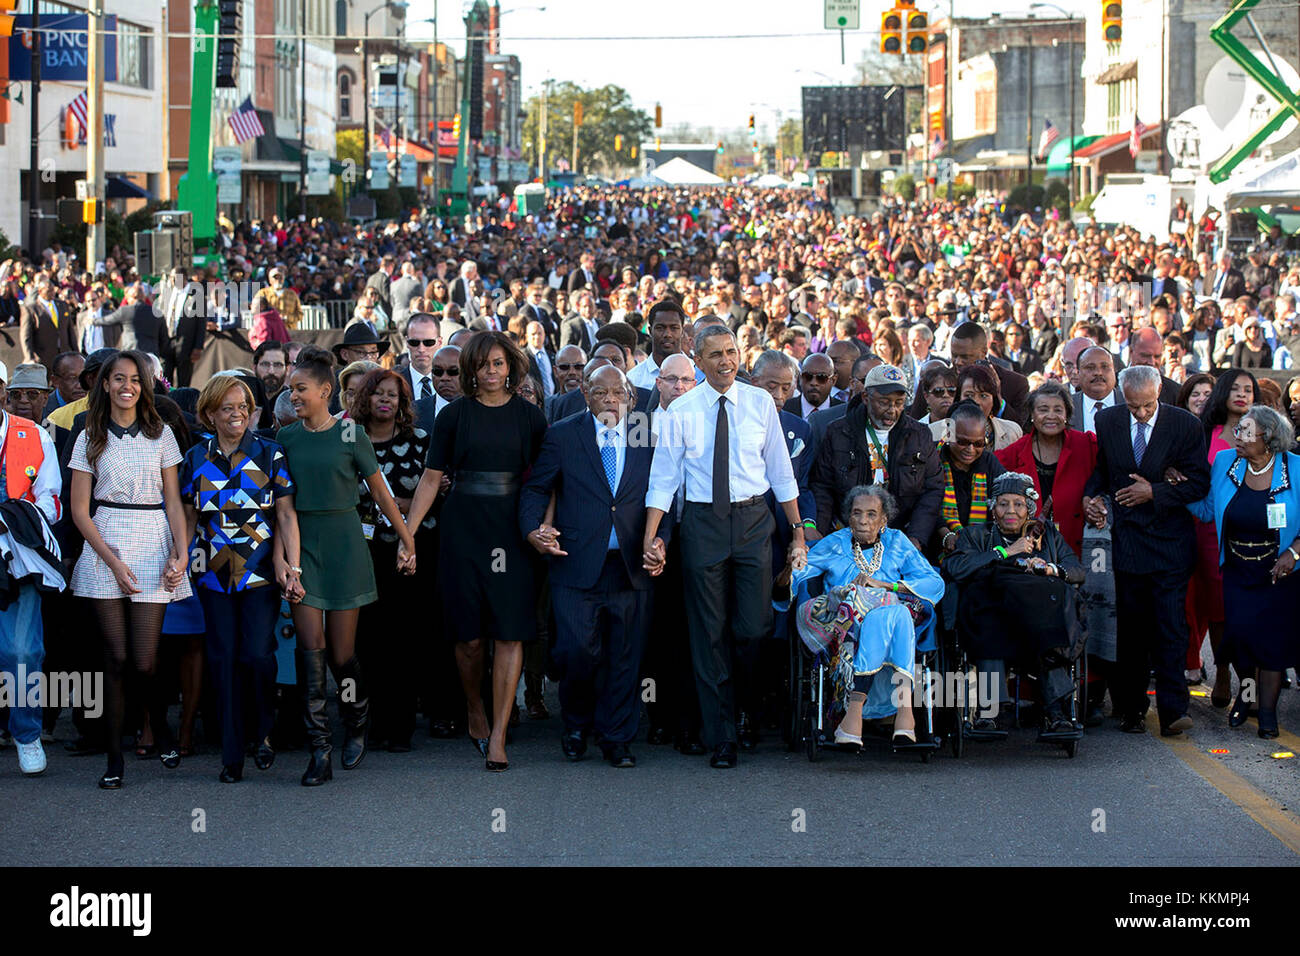 President Barack Obama and First Lady Michelle Obama join hands with Rep. John Lewis, D-Ga. as they lead the walk across the Edmund Pettus Bridge to commemorate the 50th Anniversary of Bloody Sunday and the Selma to Montgomery civil rights marches, in Selma, Ala., March 7, 2015. Malia and Sasha Obama join hands with their grandmother, Marian Robinson. (Official White House Photo by Lawrence Jackson)  This official White House photograph is being made available only for publication by news organizations and/or for personal use printing by the subject(s) of the photograph. The photograph may not Stock Photo